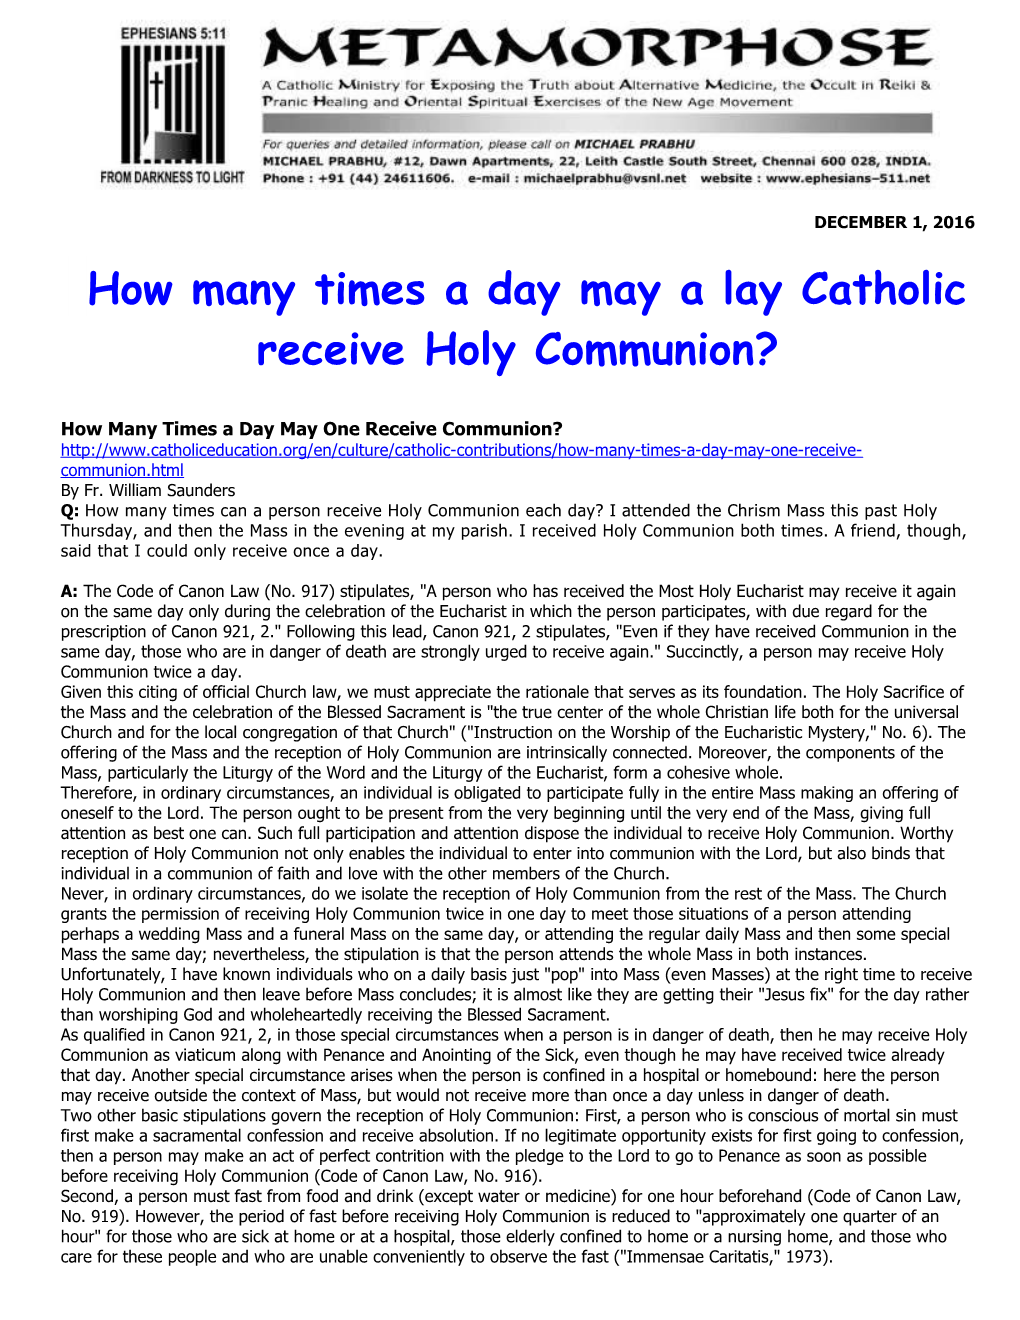 How Many Times a Day May One Receive Communion?